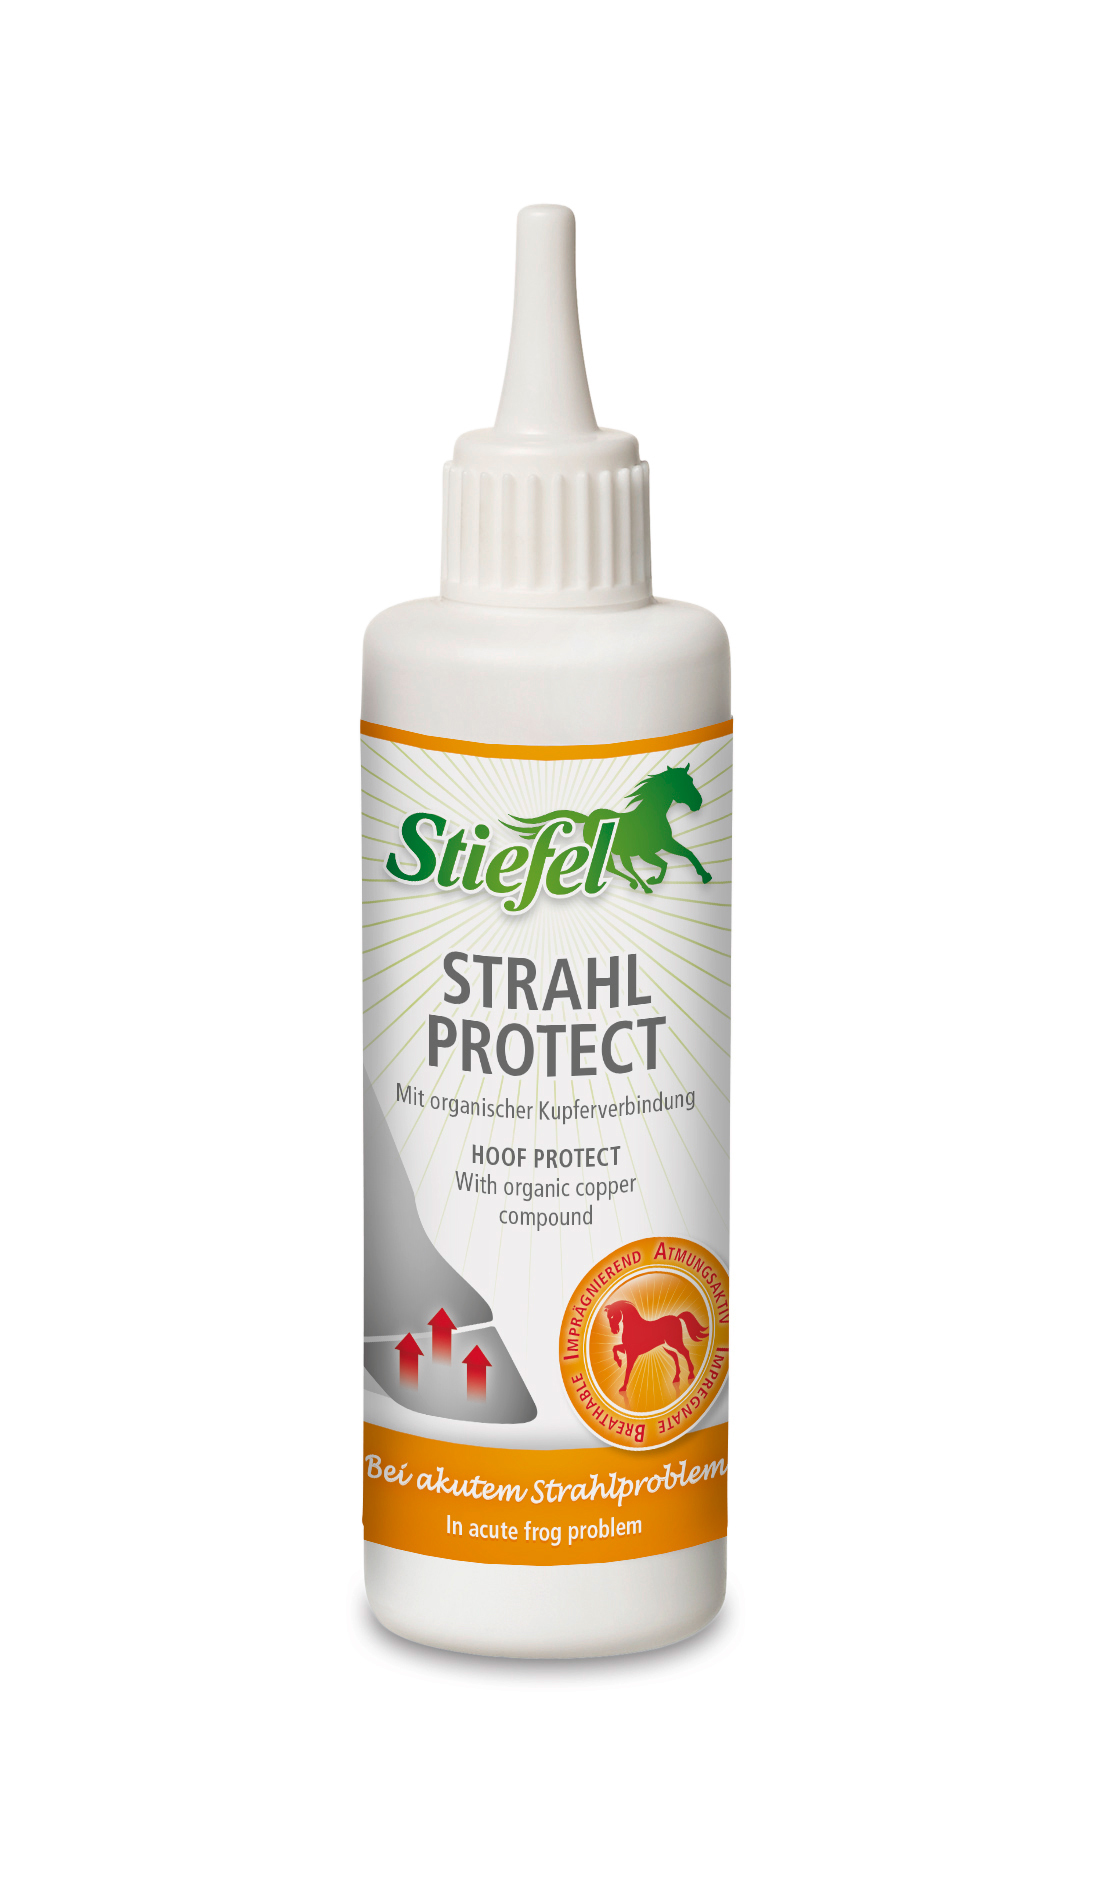 Stiefel Strahl Protect